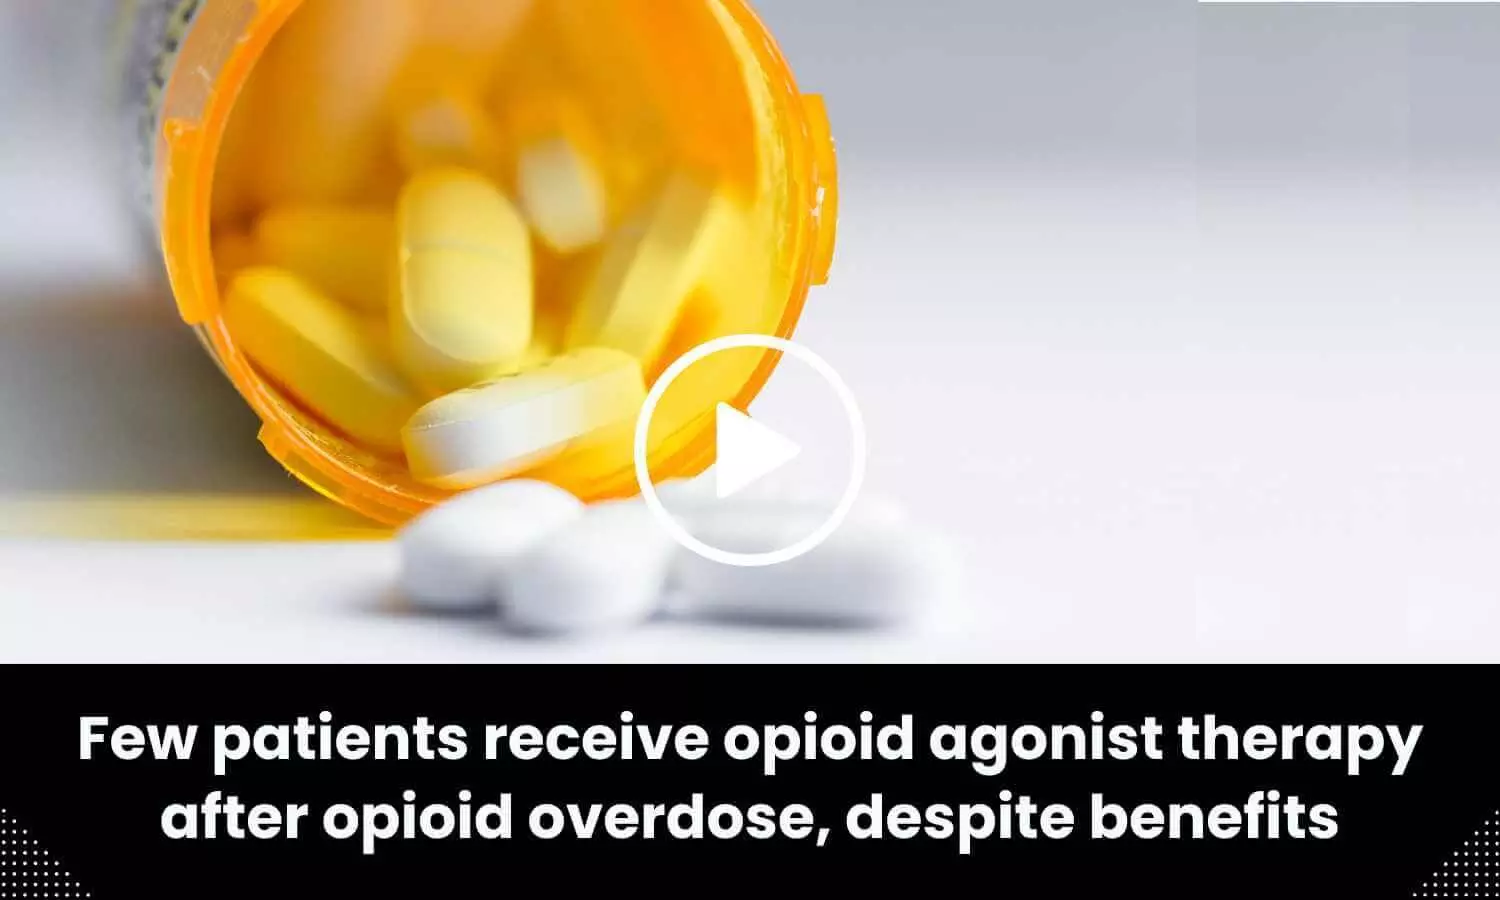 Few patients receive opioid agonist therapy after opioid overdose, despite benefits